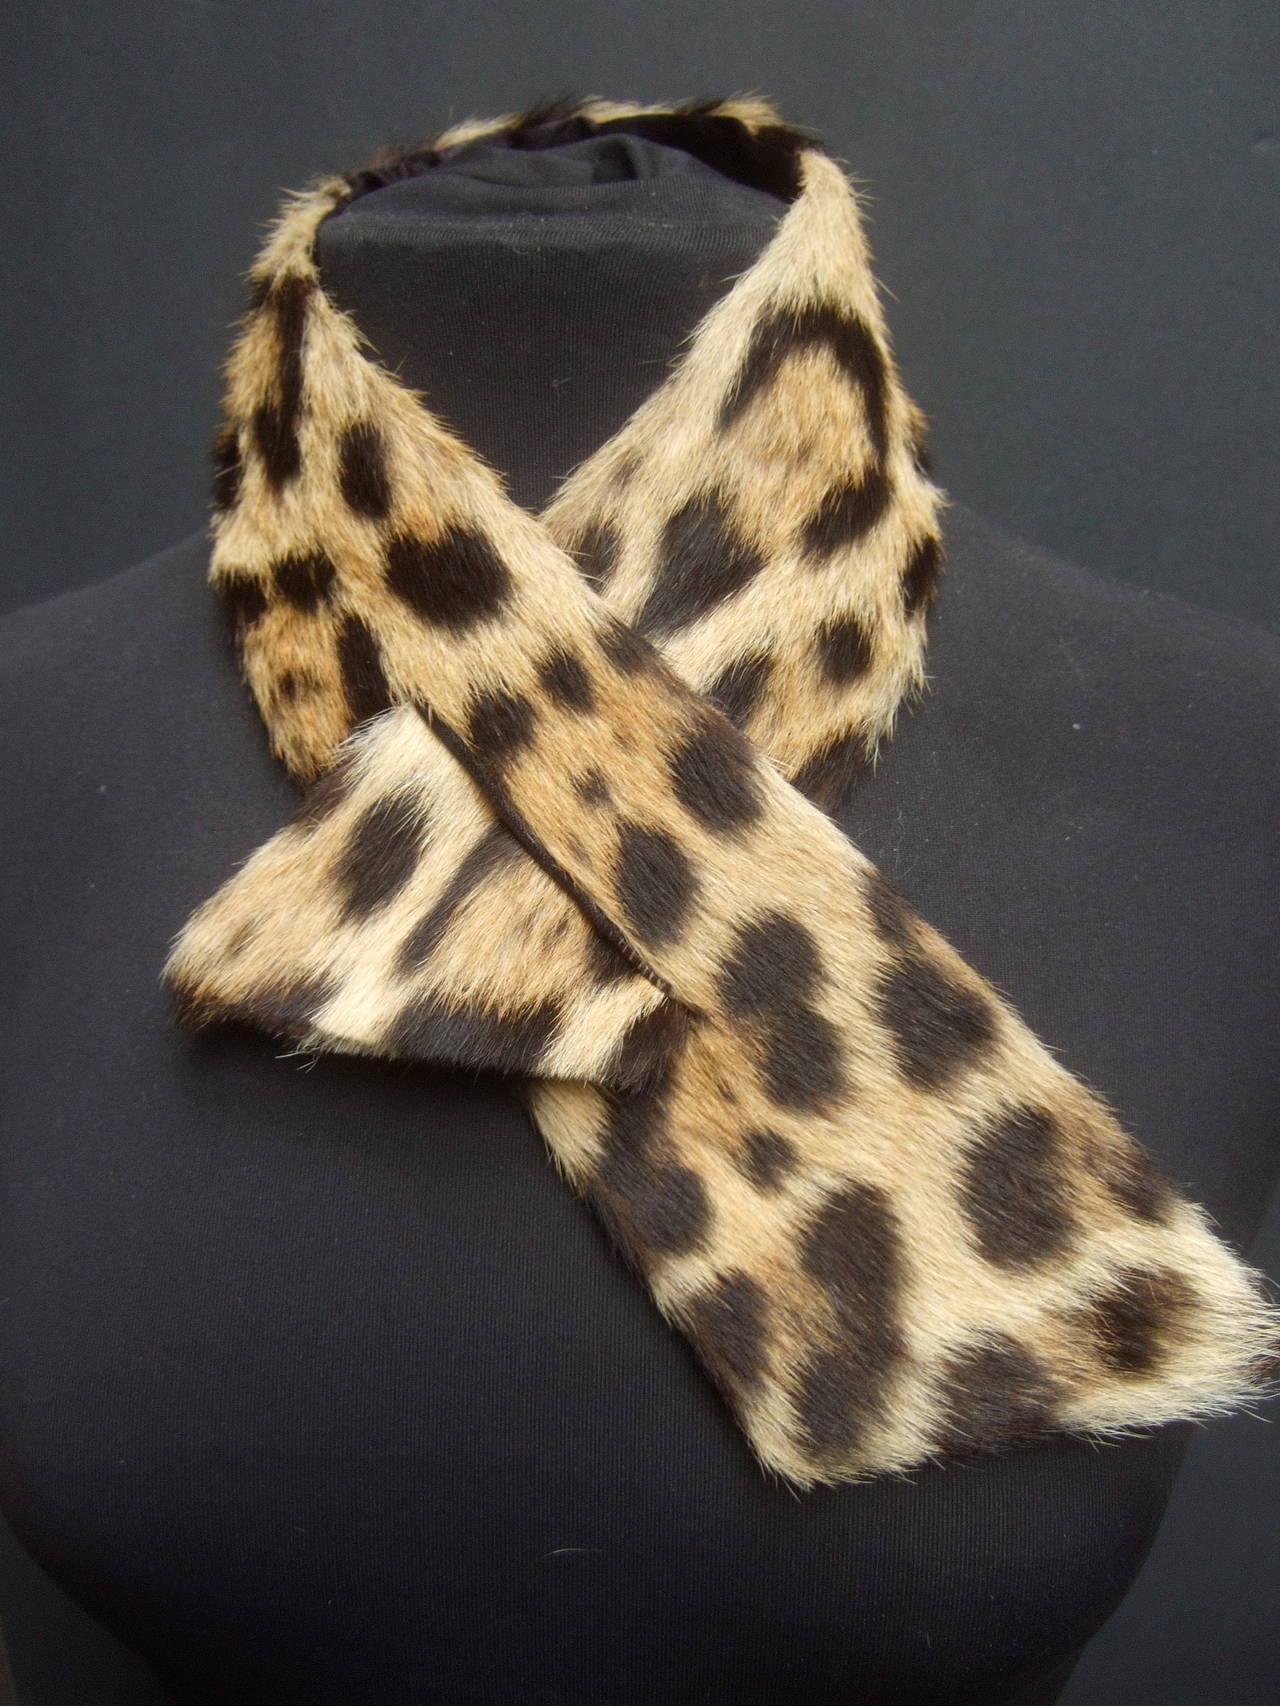 1950s Chic leopard print fur scarf collar
This fur scarf is designed with a slit 
 to secure both ends together  

The innovative design allows the fur
scarf collar to adapt to various 
garments; over a coat collar, placed
over a jacket or